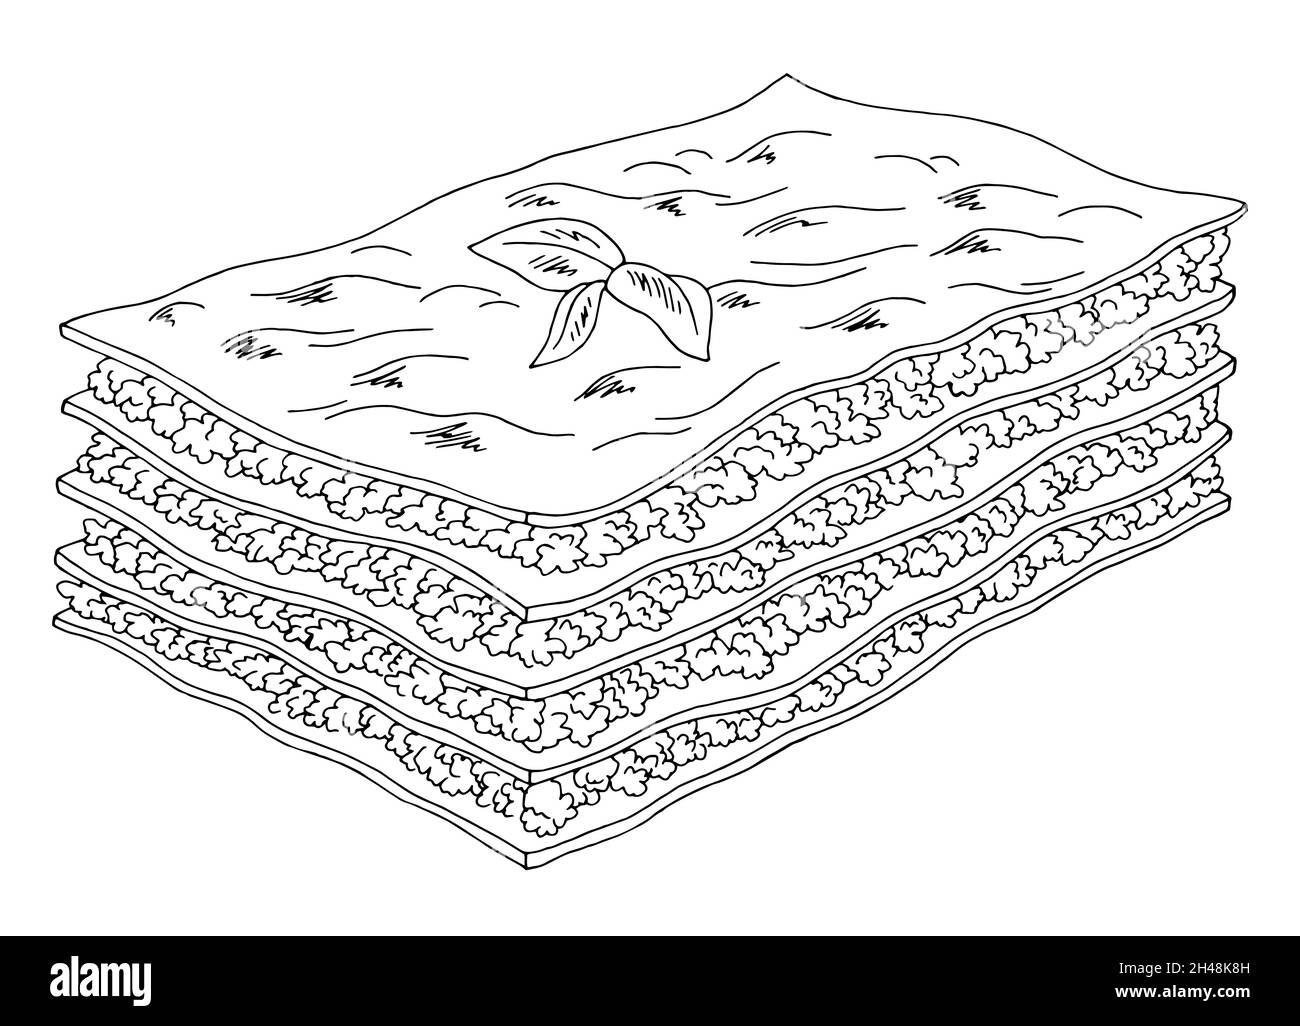 Lasagna graphic black white isolated sketch illustration vector Stock Vector